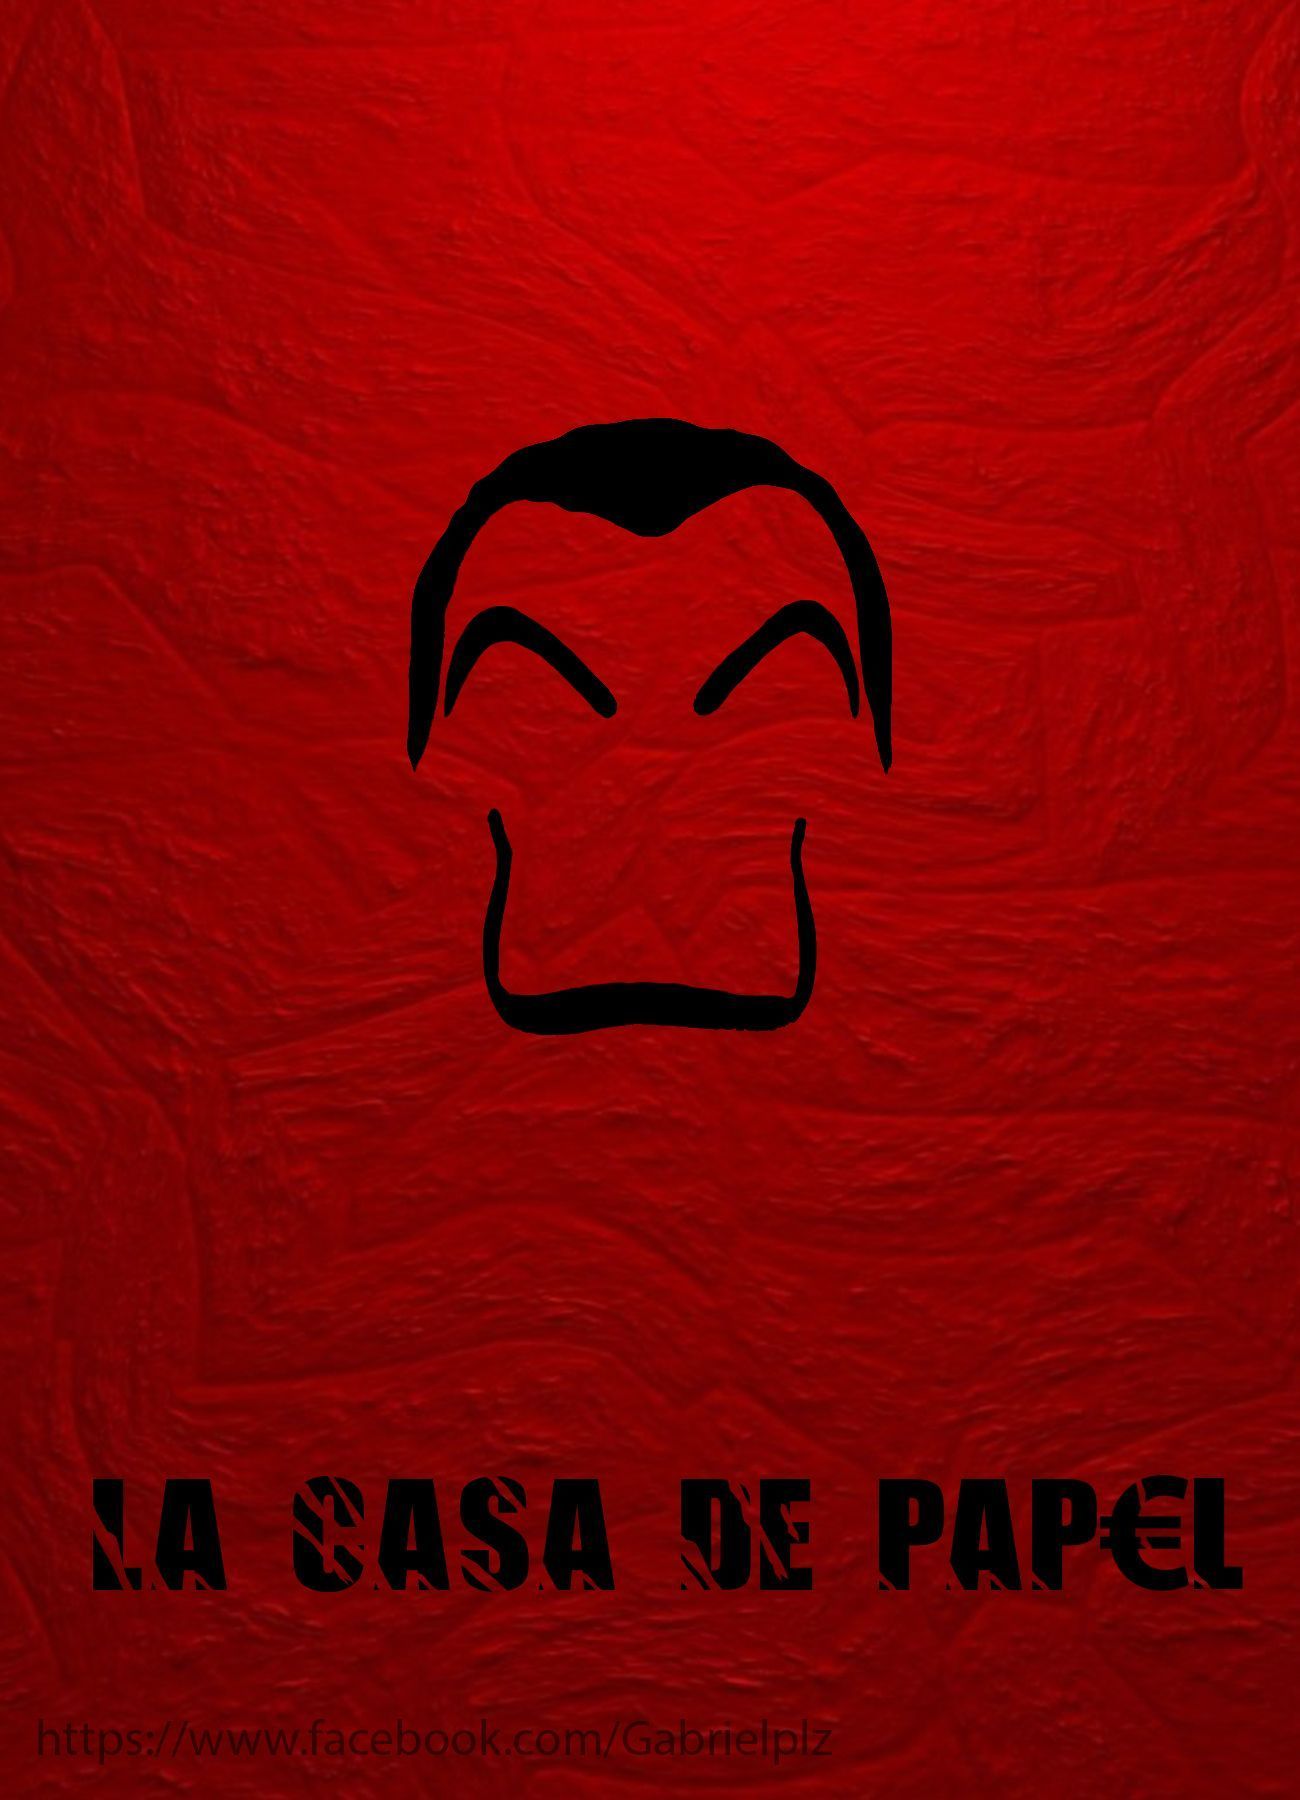 Money heist is one of the best shows on Netflix right now. If you're psyched after finishing it then here are. Best shows on netflix, iPhone wallpaper, Wallpaper